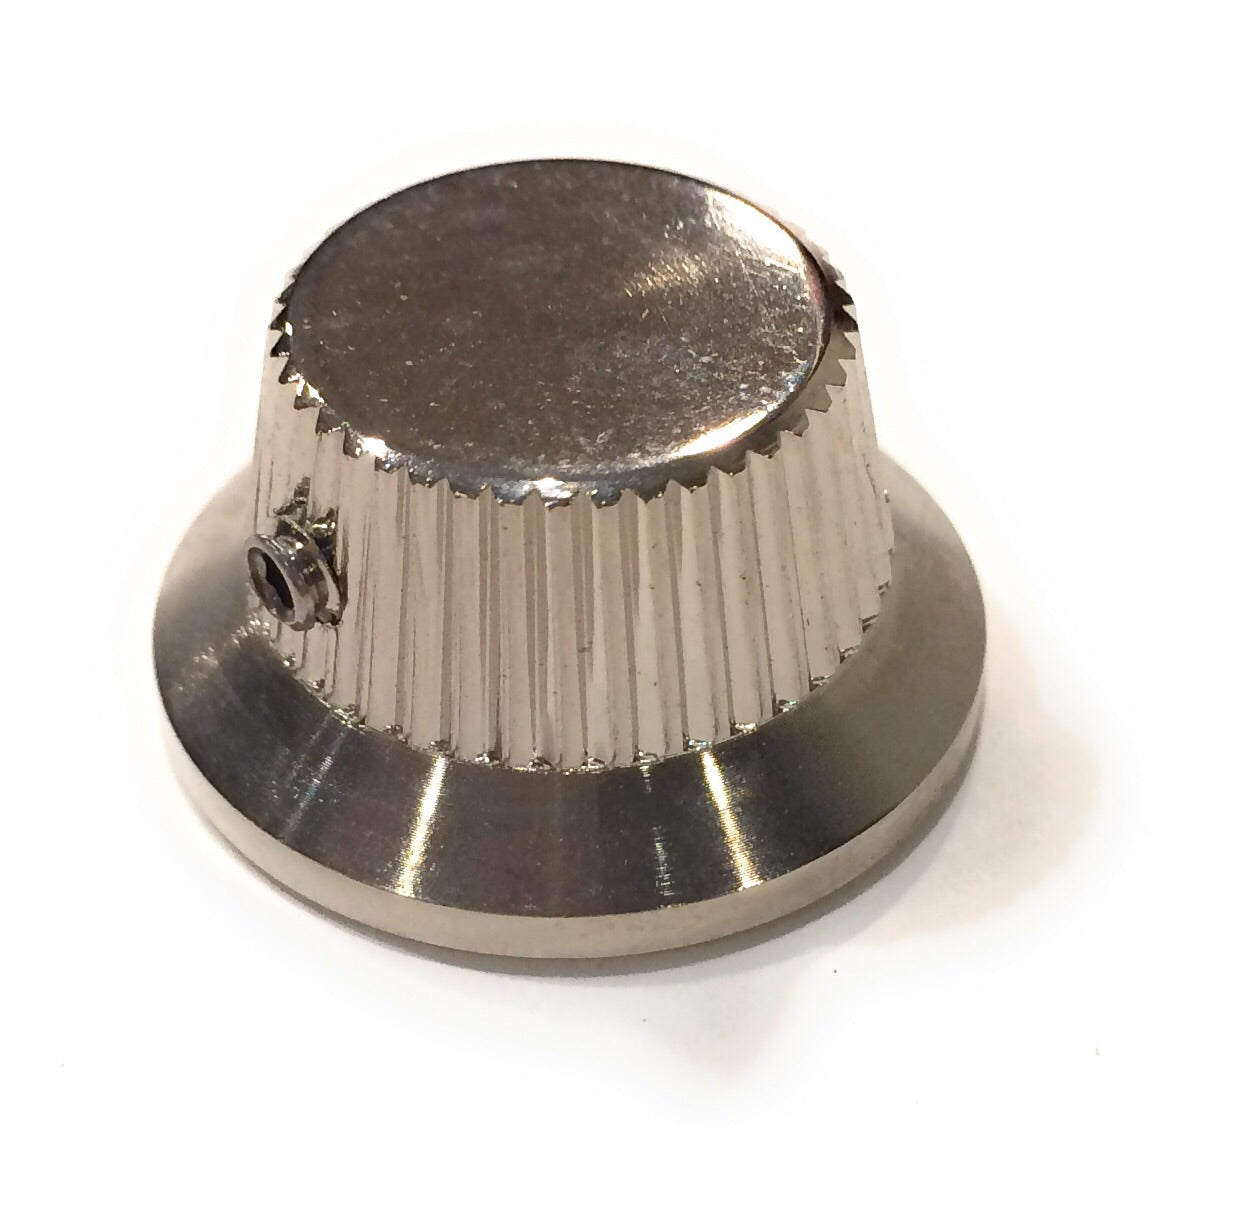 Strat Knobs or Gretsch style  Aluminum Knobs